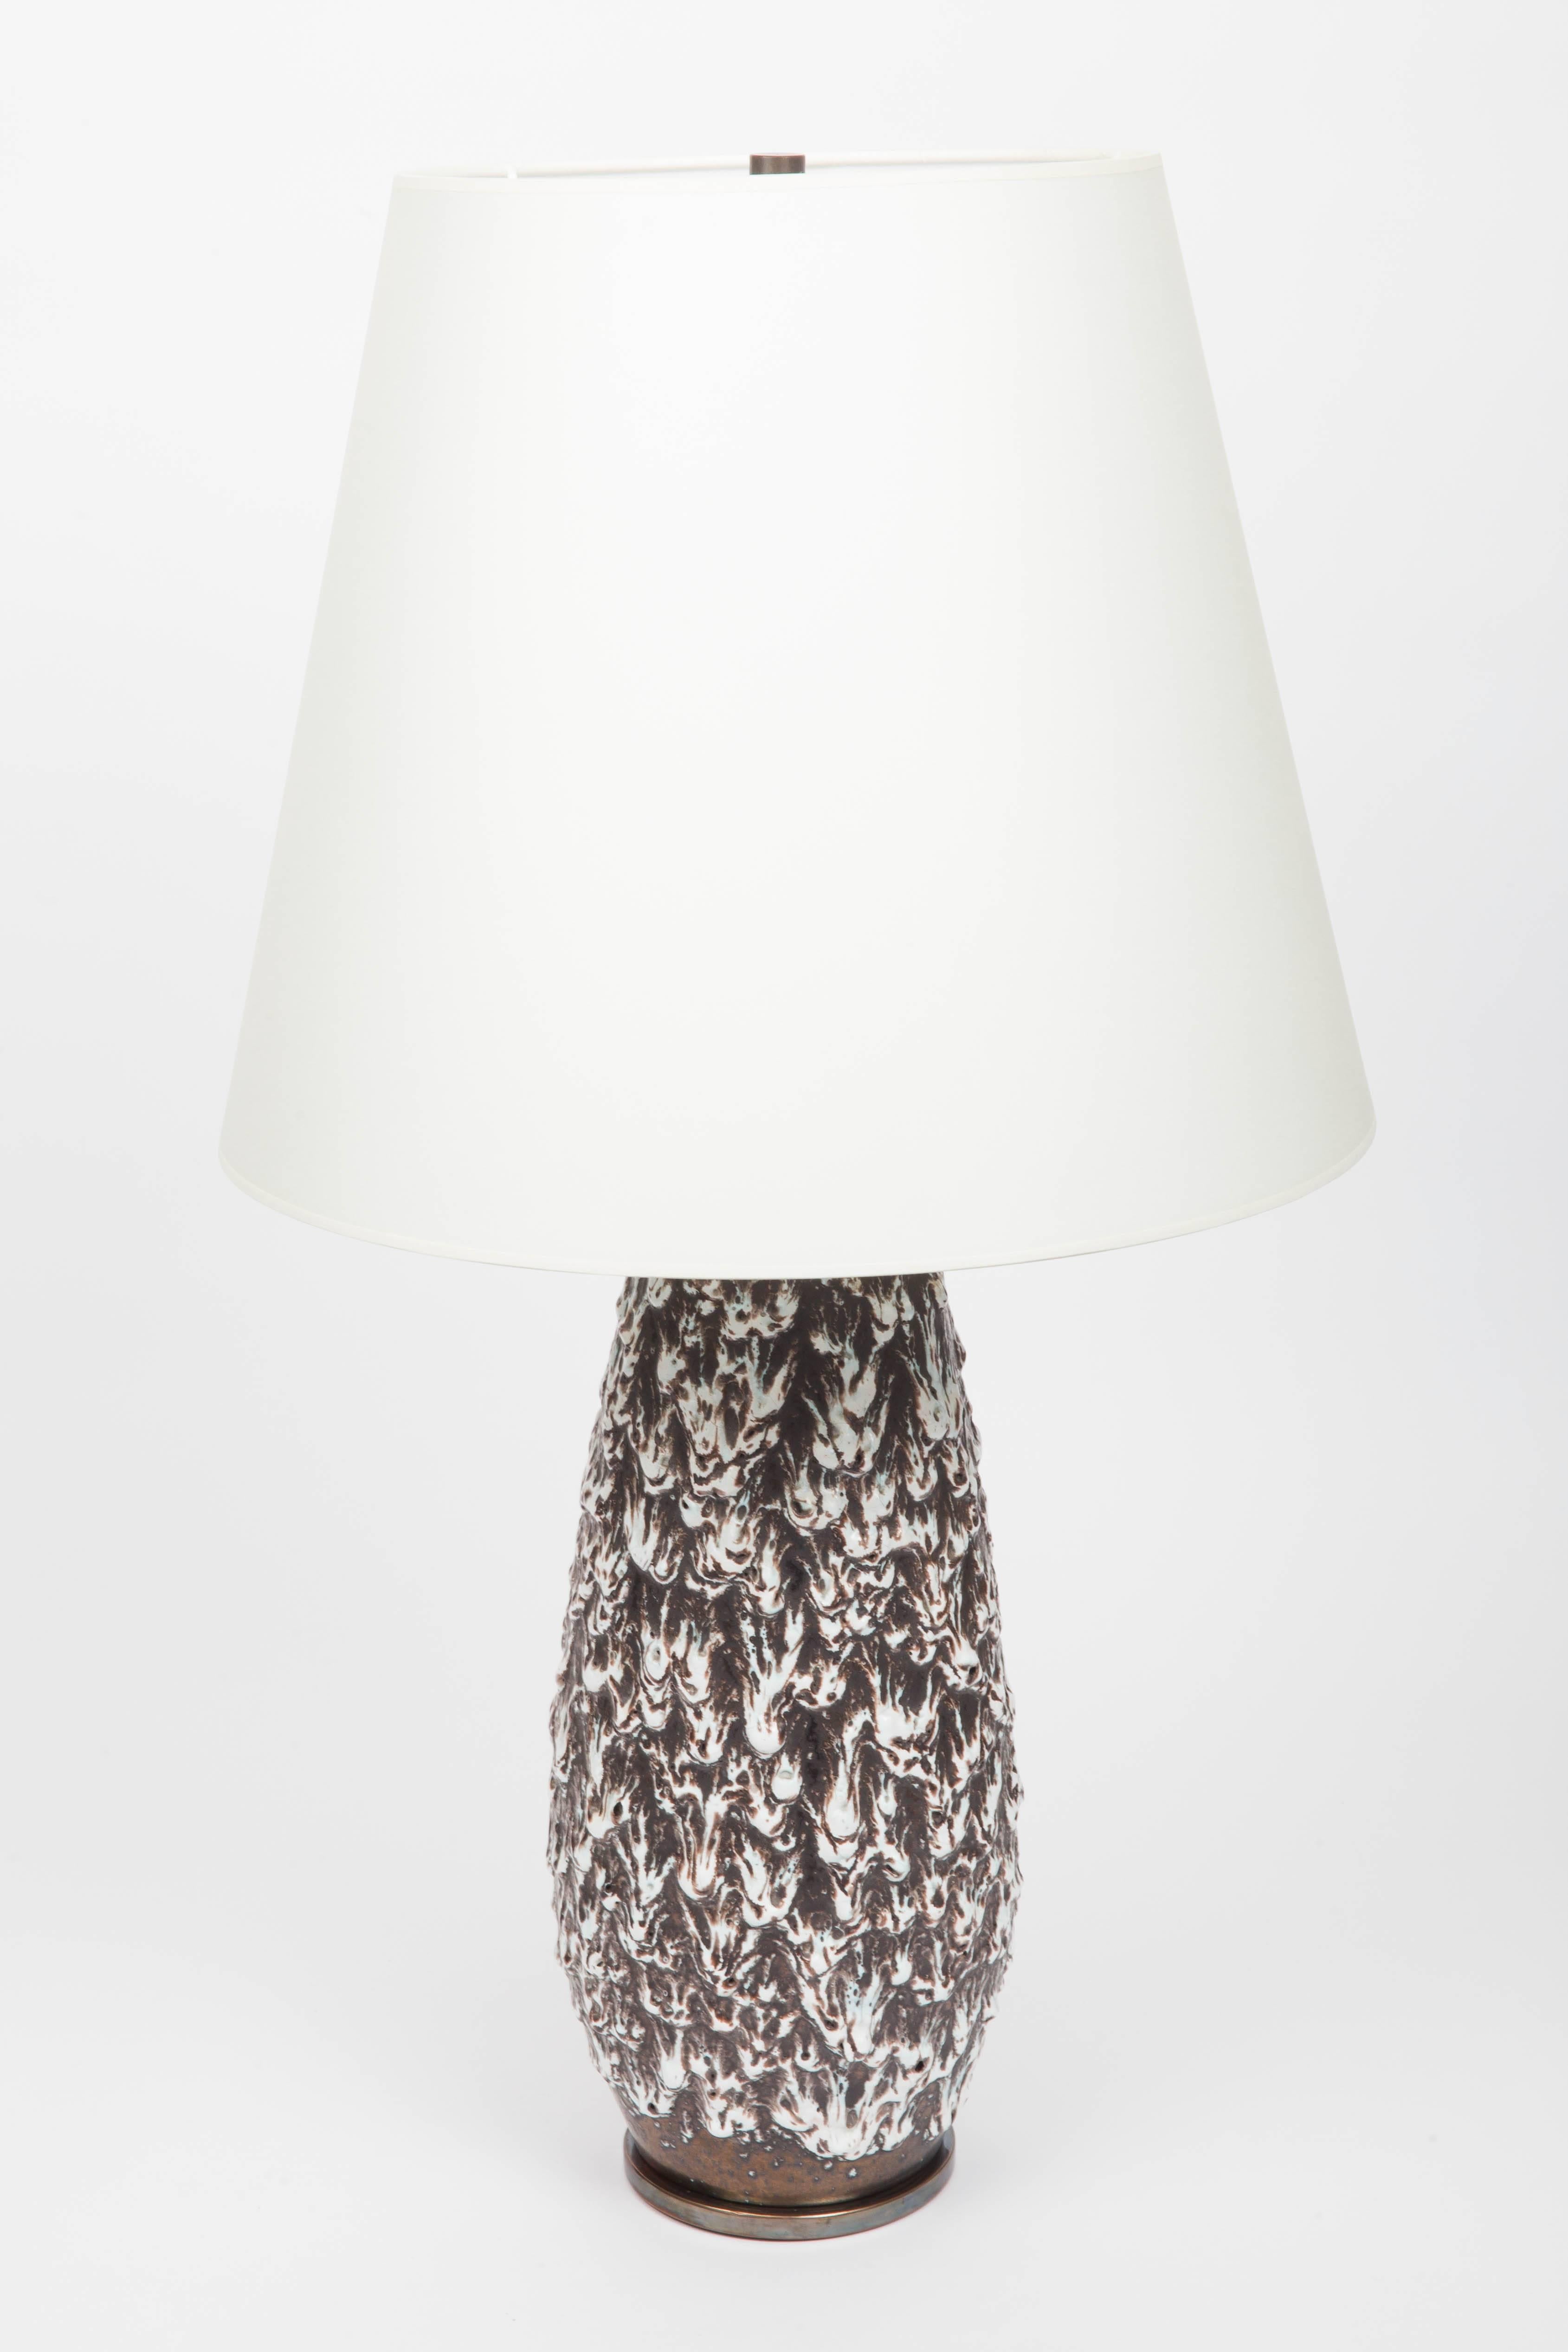 German Brown and White Fat Lava Vase Converted into Lamp